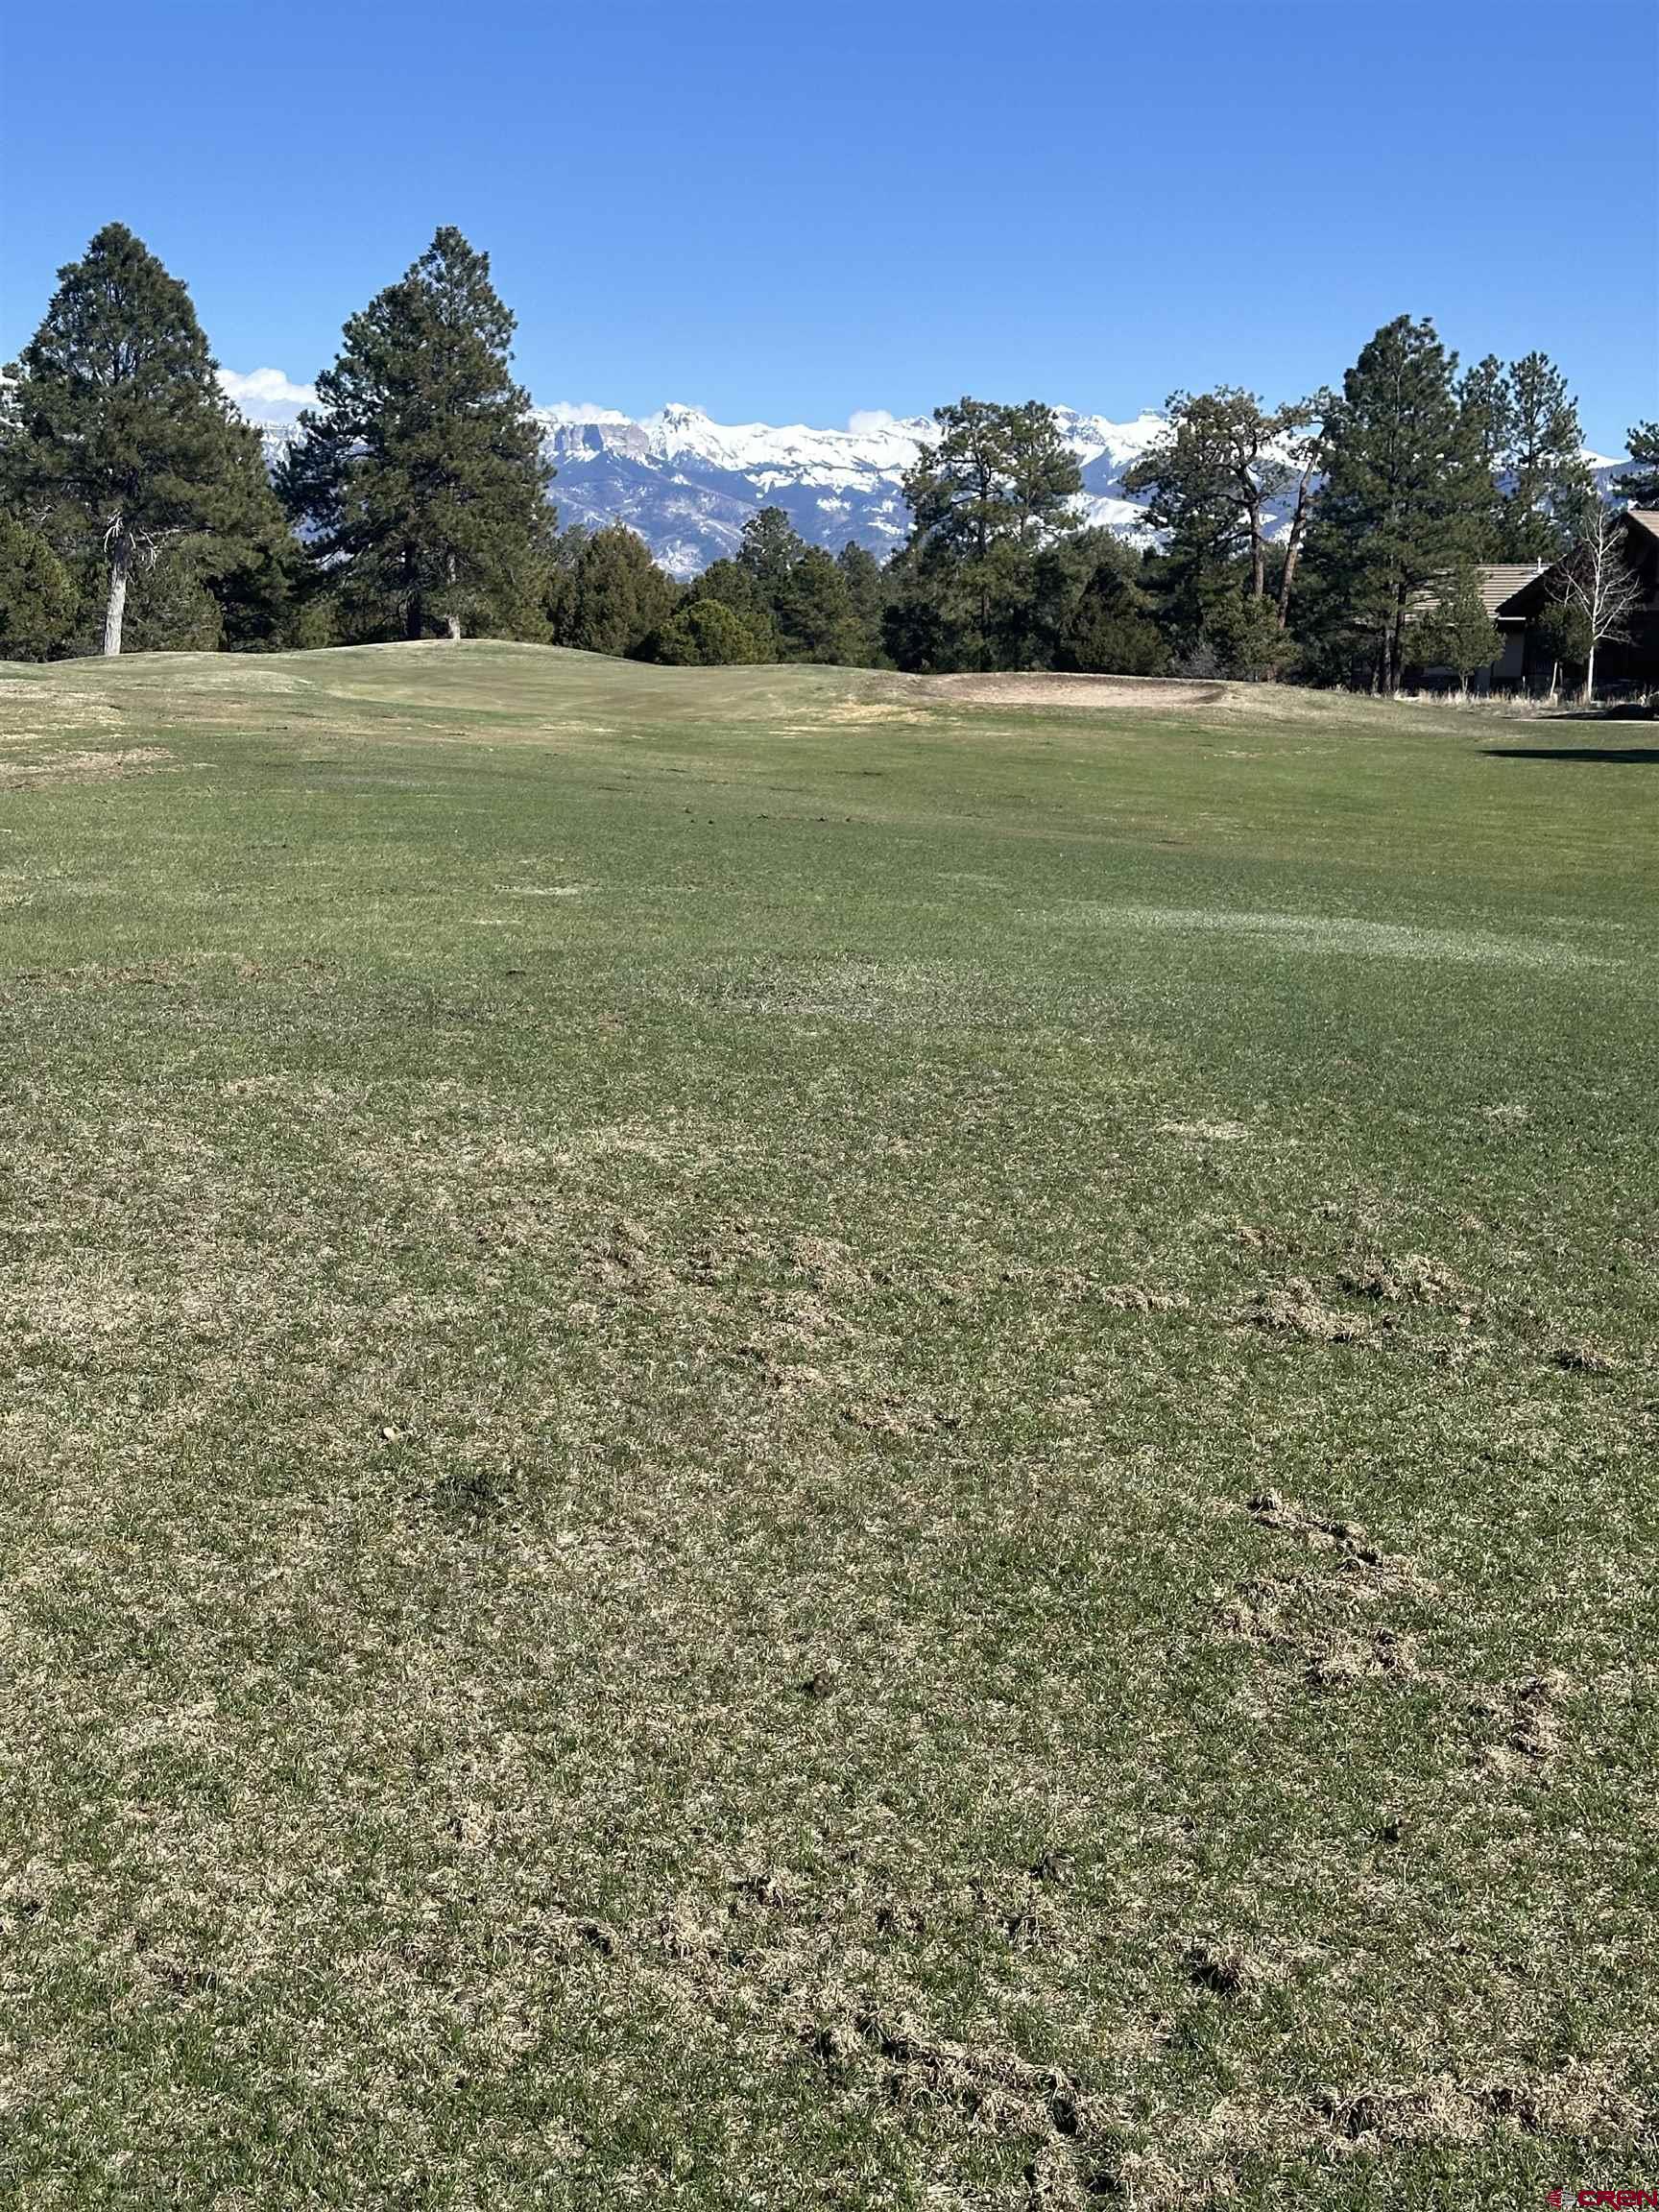 Located on the 10th fairway with Extraordinary Fairway CIMARRON VIEWS,  Extraordinary Fairway MT. SNEFFELS VIEWS, and  Extraordinary SOUTH FACING FAIRWAY VIEWS.  You have plenty of room on this .45 acre lot and you can build a 1,600 square foot house or more. Icing on the cake is, unless the golf course is hosting a 4 some of long drive contestants your not going to get errant golf balls in your yard.  Your within easy walking distance to the club house. Speaking of the golf course, Divide Ranch Golf Course is so much fun to play. One of the best.  Working from home just got easier with the new fibre optic line.  Fairway Pines is located 30 minutes from Montrose and 45 Minutes to Telluride.